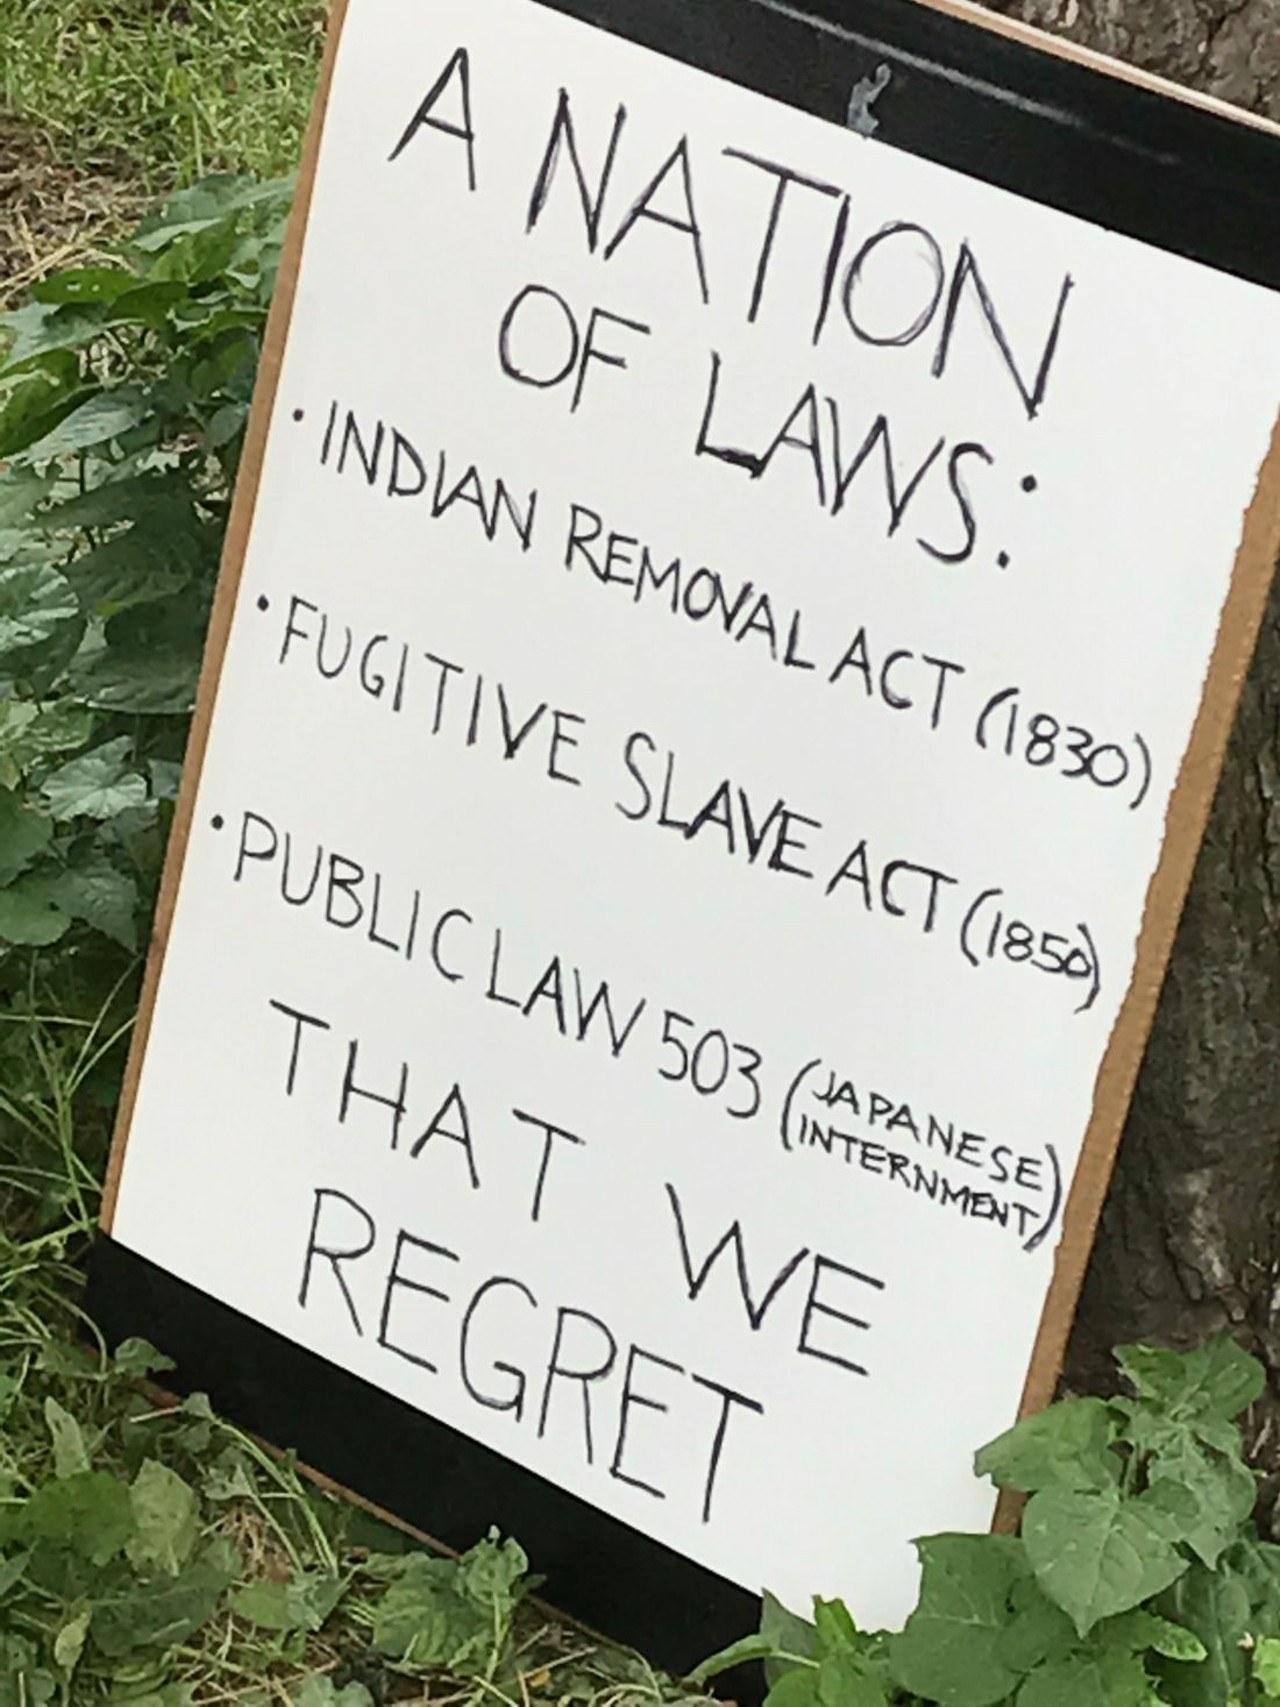 All the signs we saw at the 'Families Belong Together' rally in Detroit's Clark Park